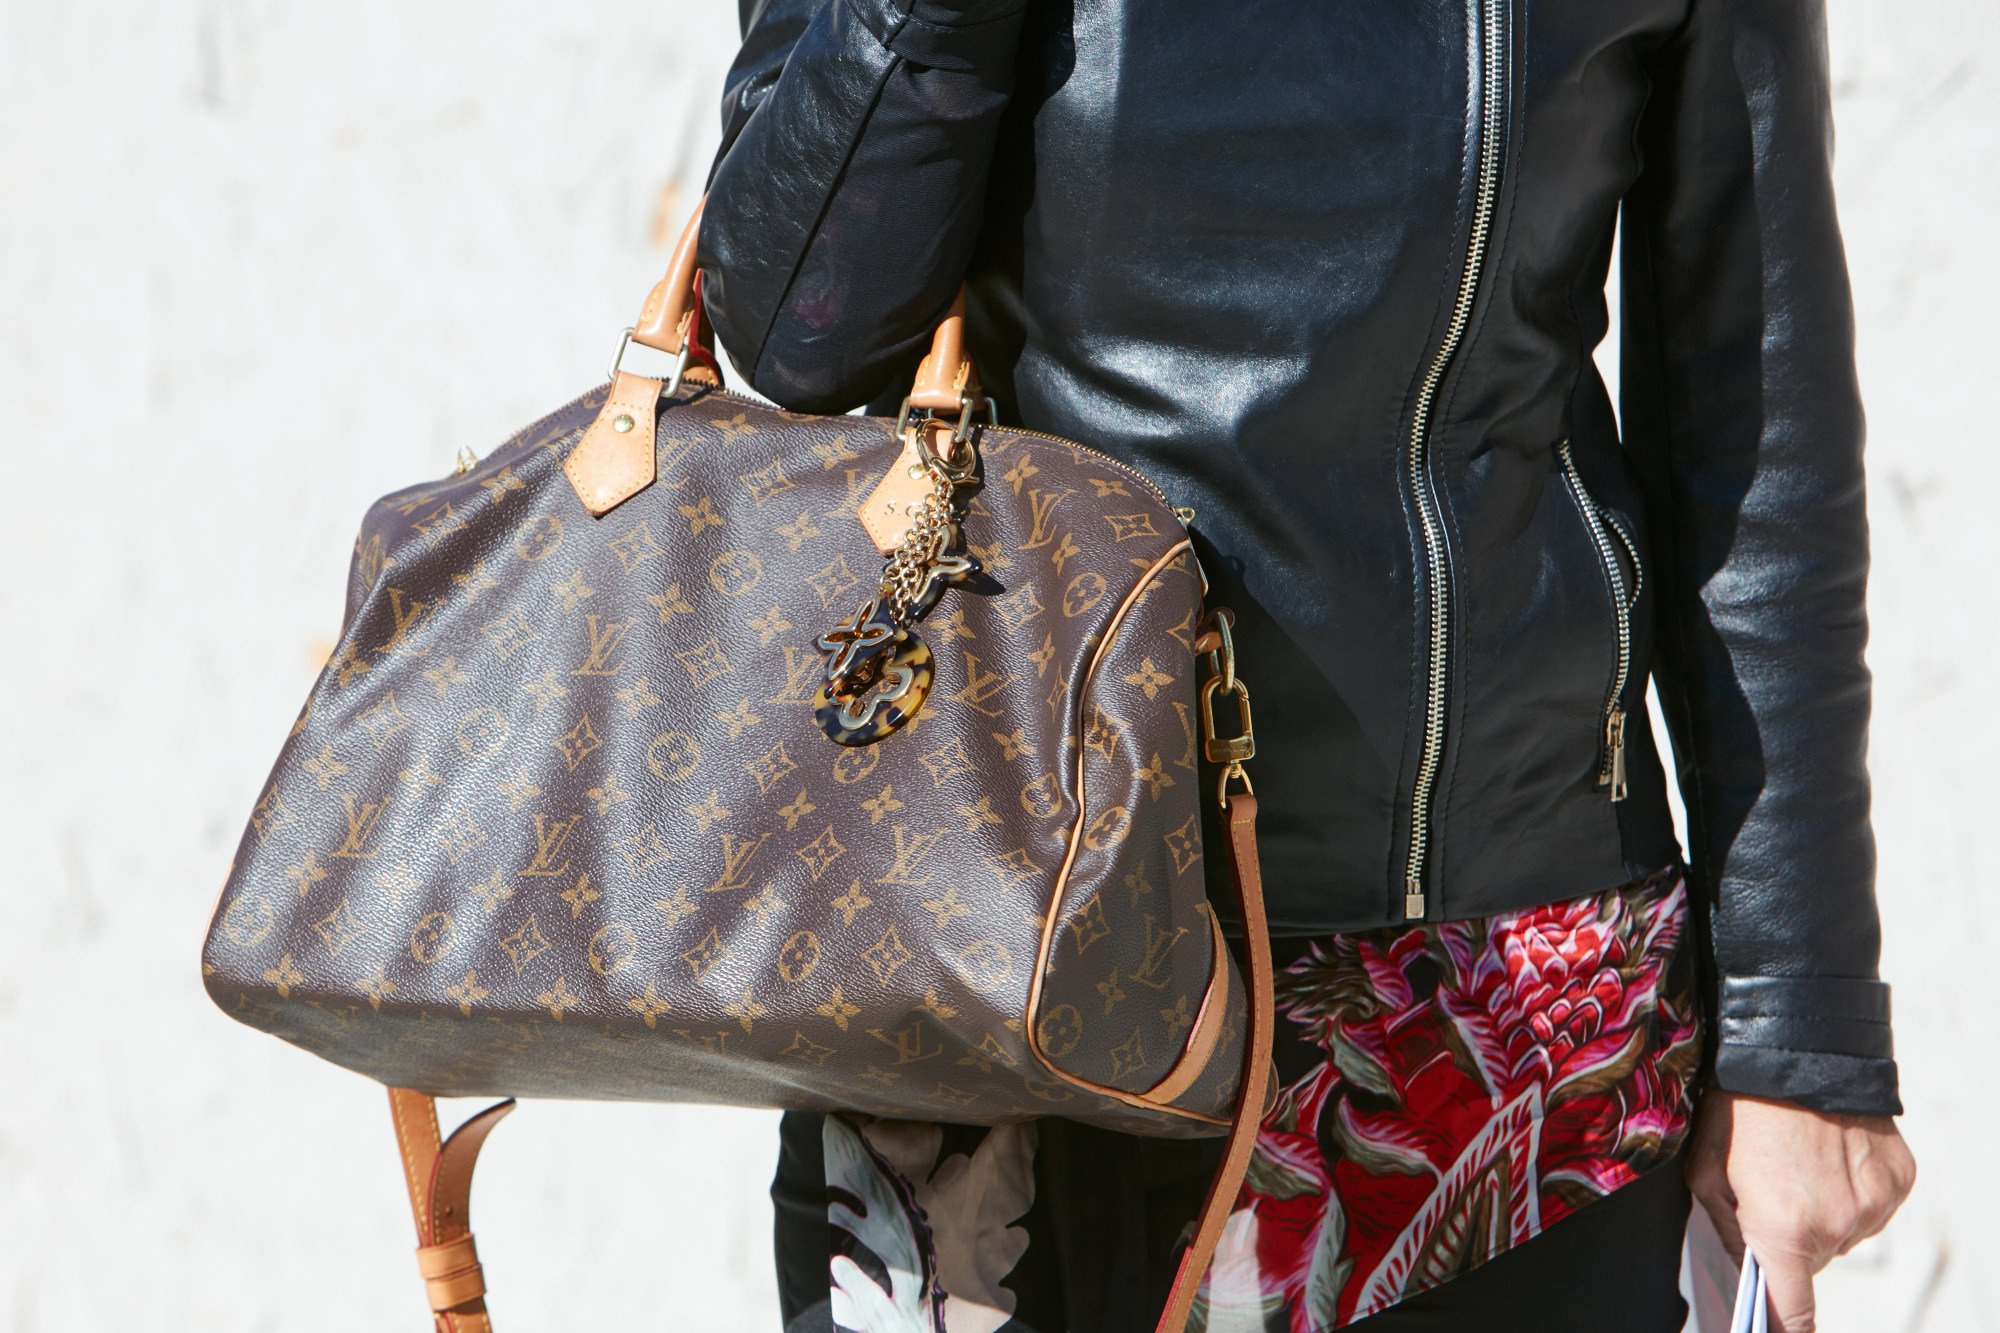 Louis Vuitton Confirms Worldwide Price Increases, Citing Rising Costs,  Inflation - The Fashion Law